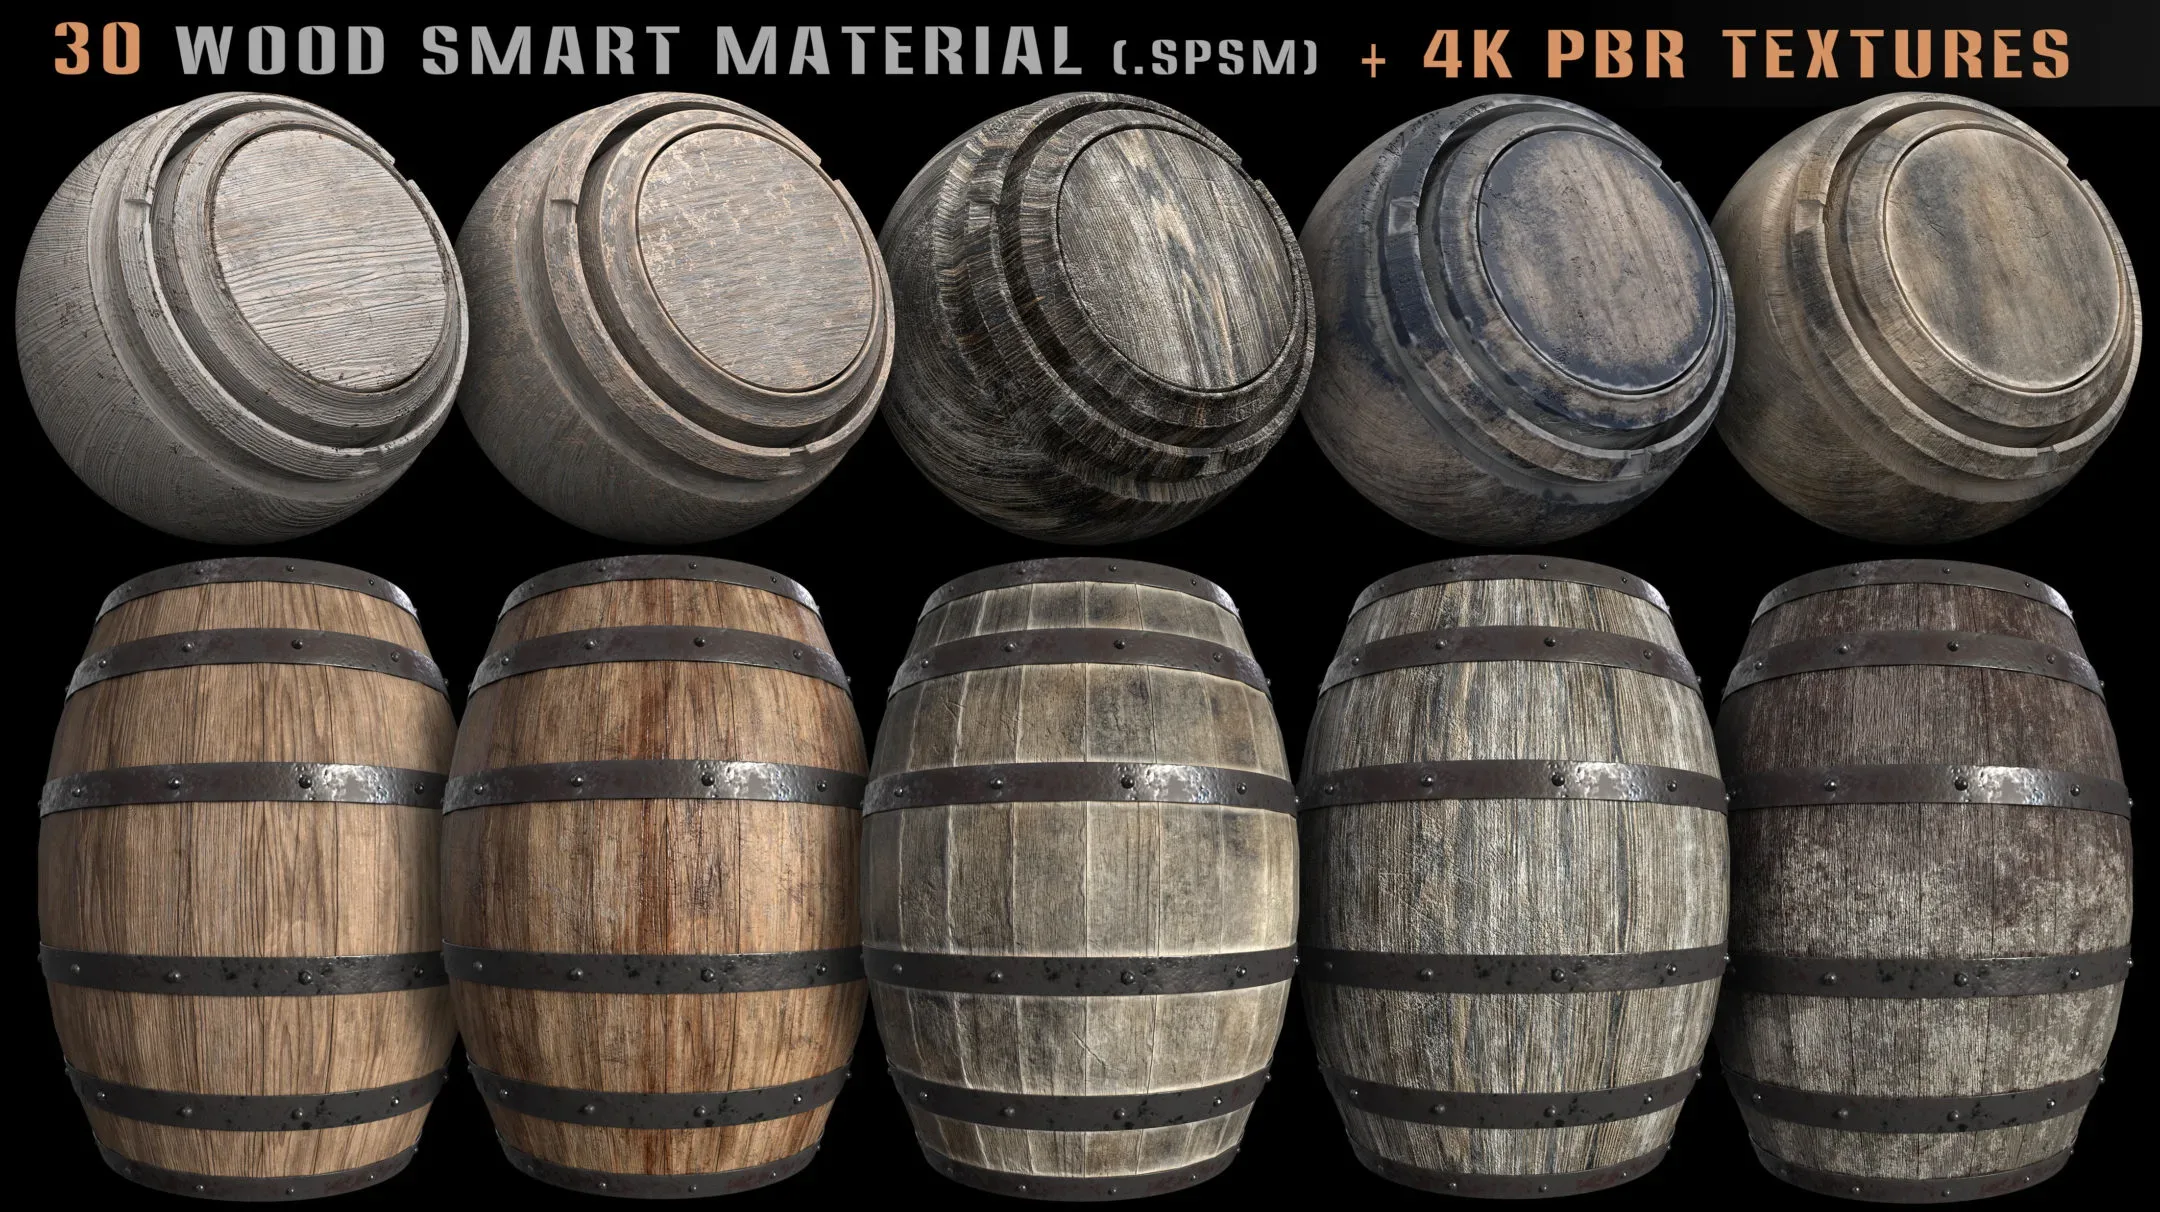 30 wood smart material and 4k PBR textures - Vol 10